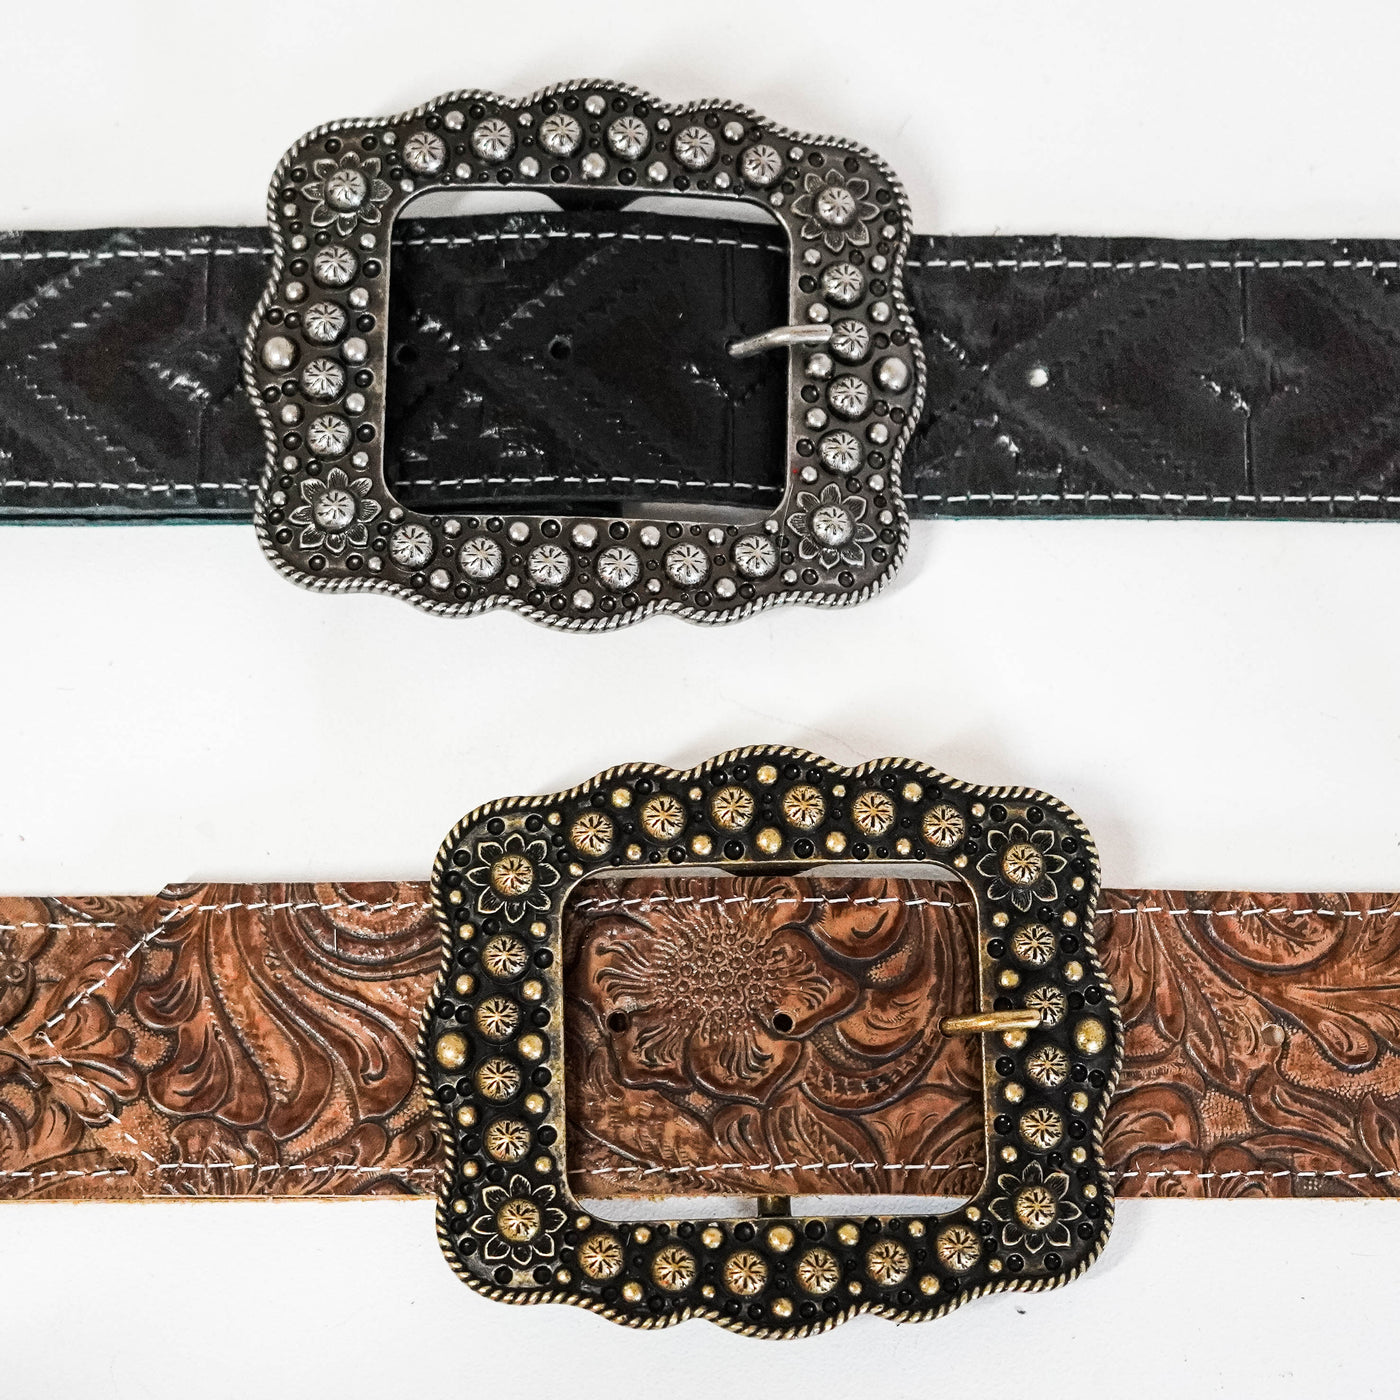 Adjustable Crossbody Buckle Straps-Western-Cowhide-Bags-Handmade-Products-Gifts-Dancing Cactus Designs